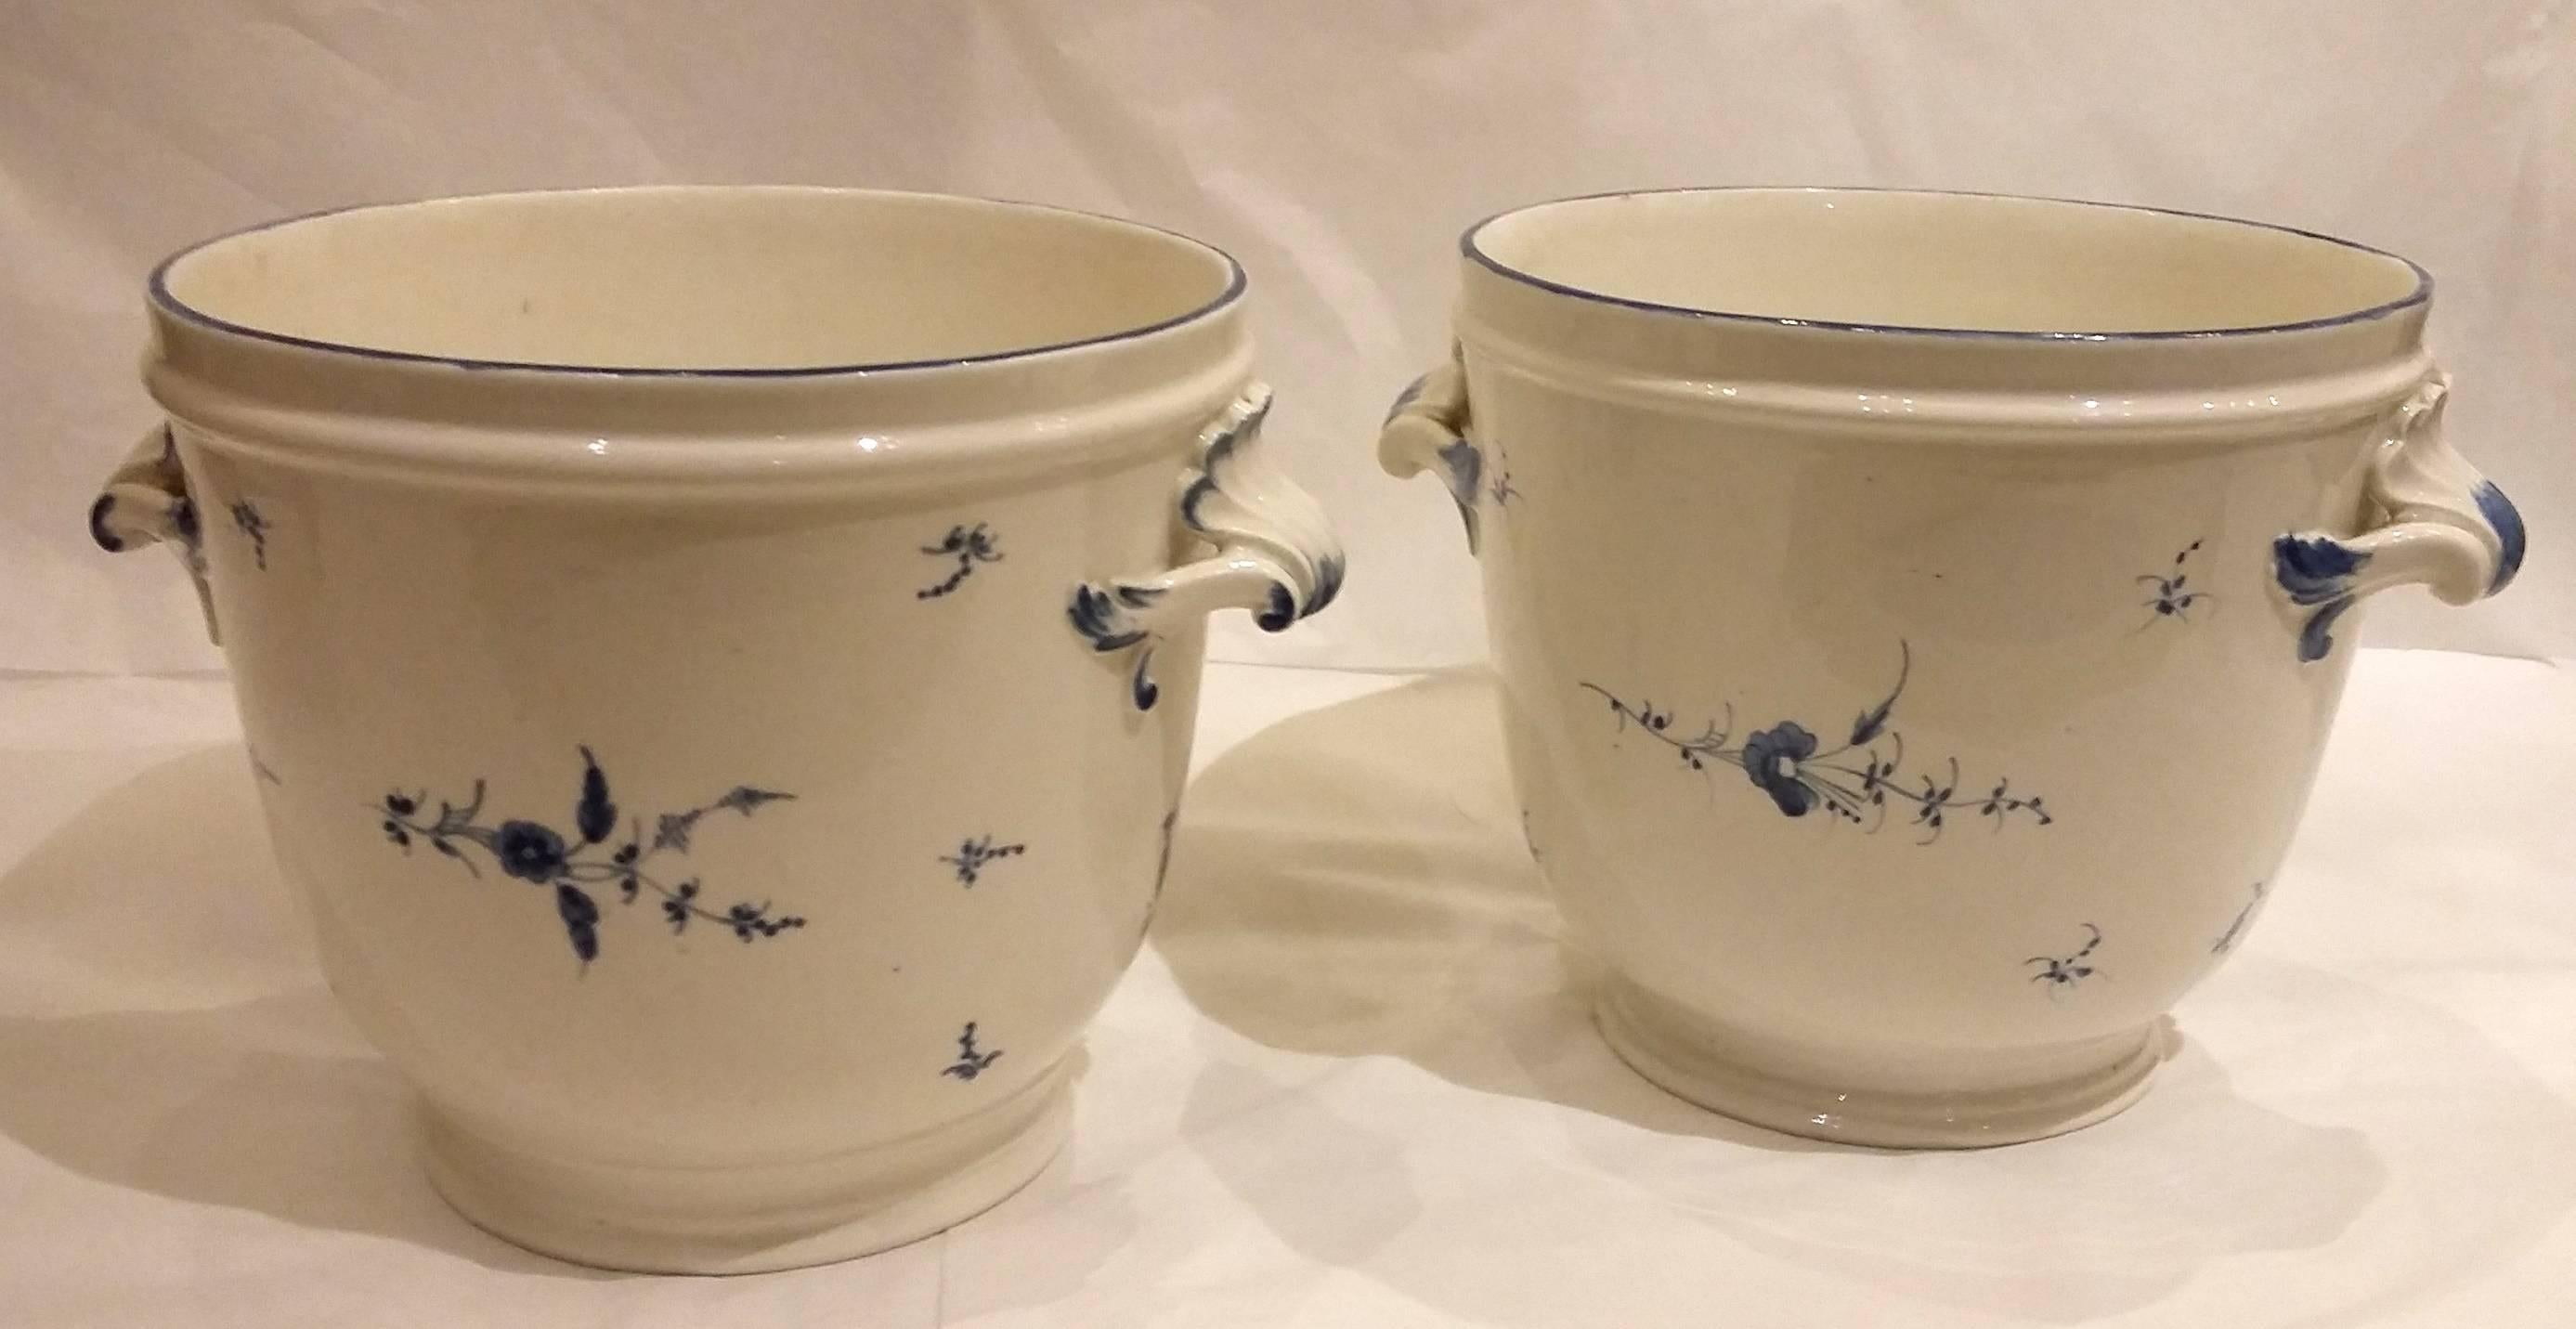 A set of 18th century Chantilly soft paste blue and white decor of ‘Chantilly sprigs’, circa 1760-1770. Total of 53 pieces:
30 plates
16 plates with basket weave border
One pair of wine coolers
One large dish
Three round dishes
One sugar